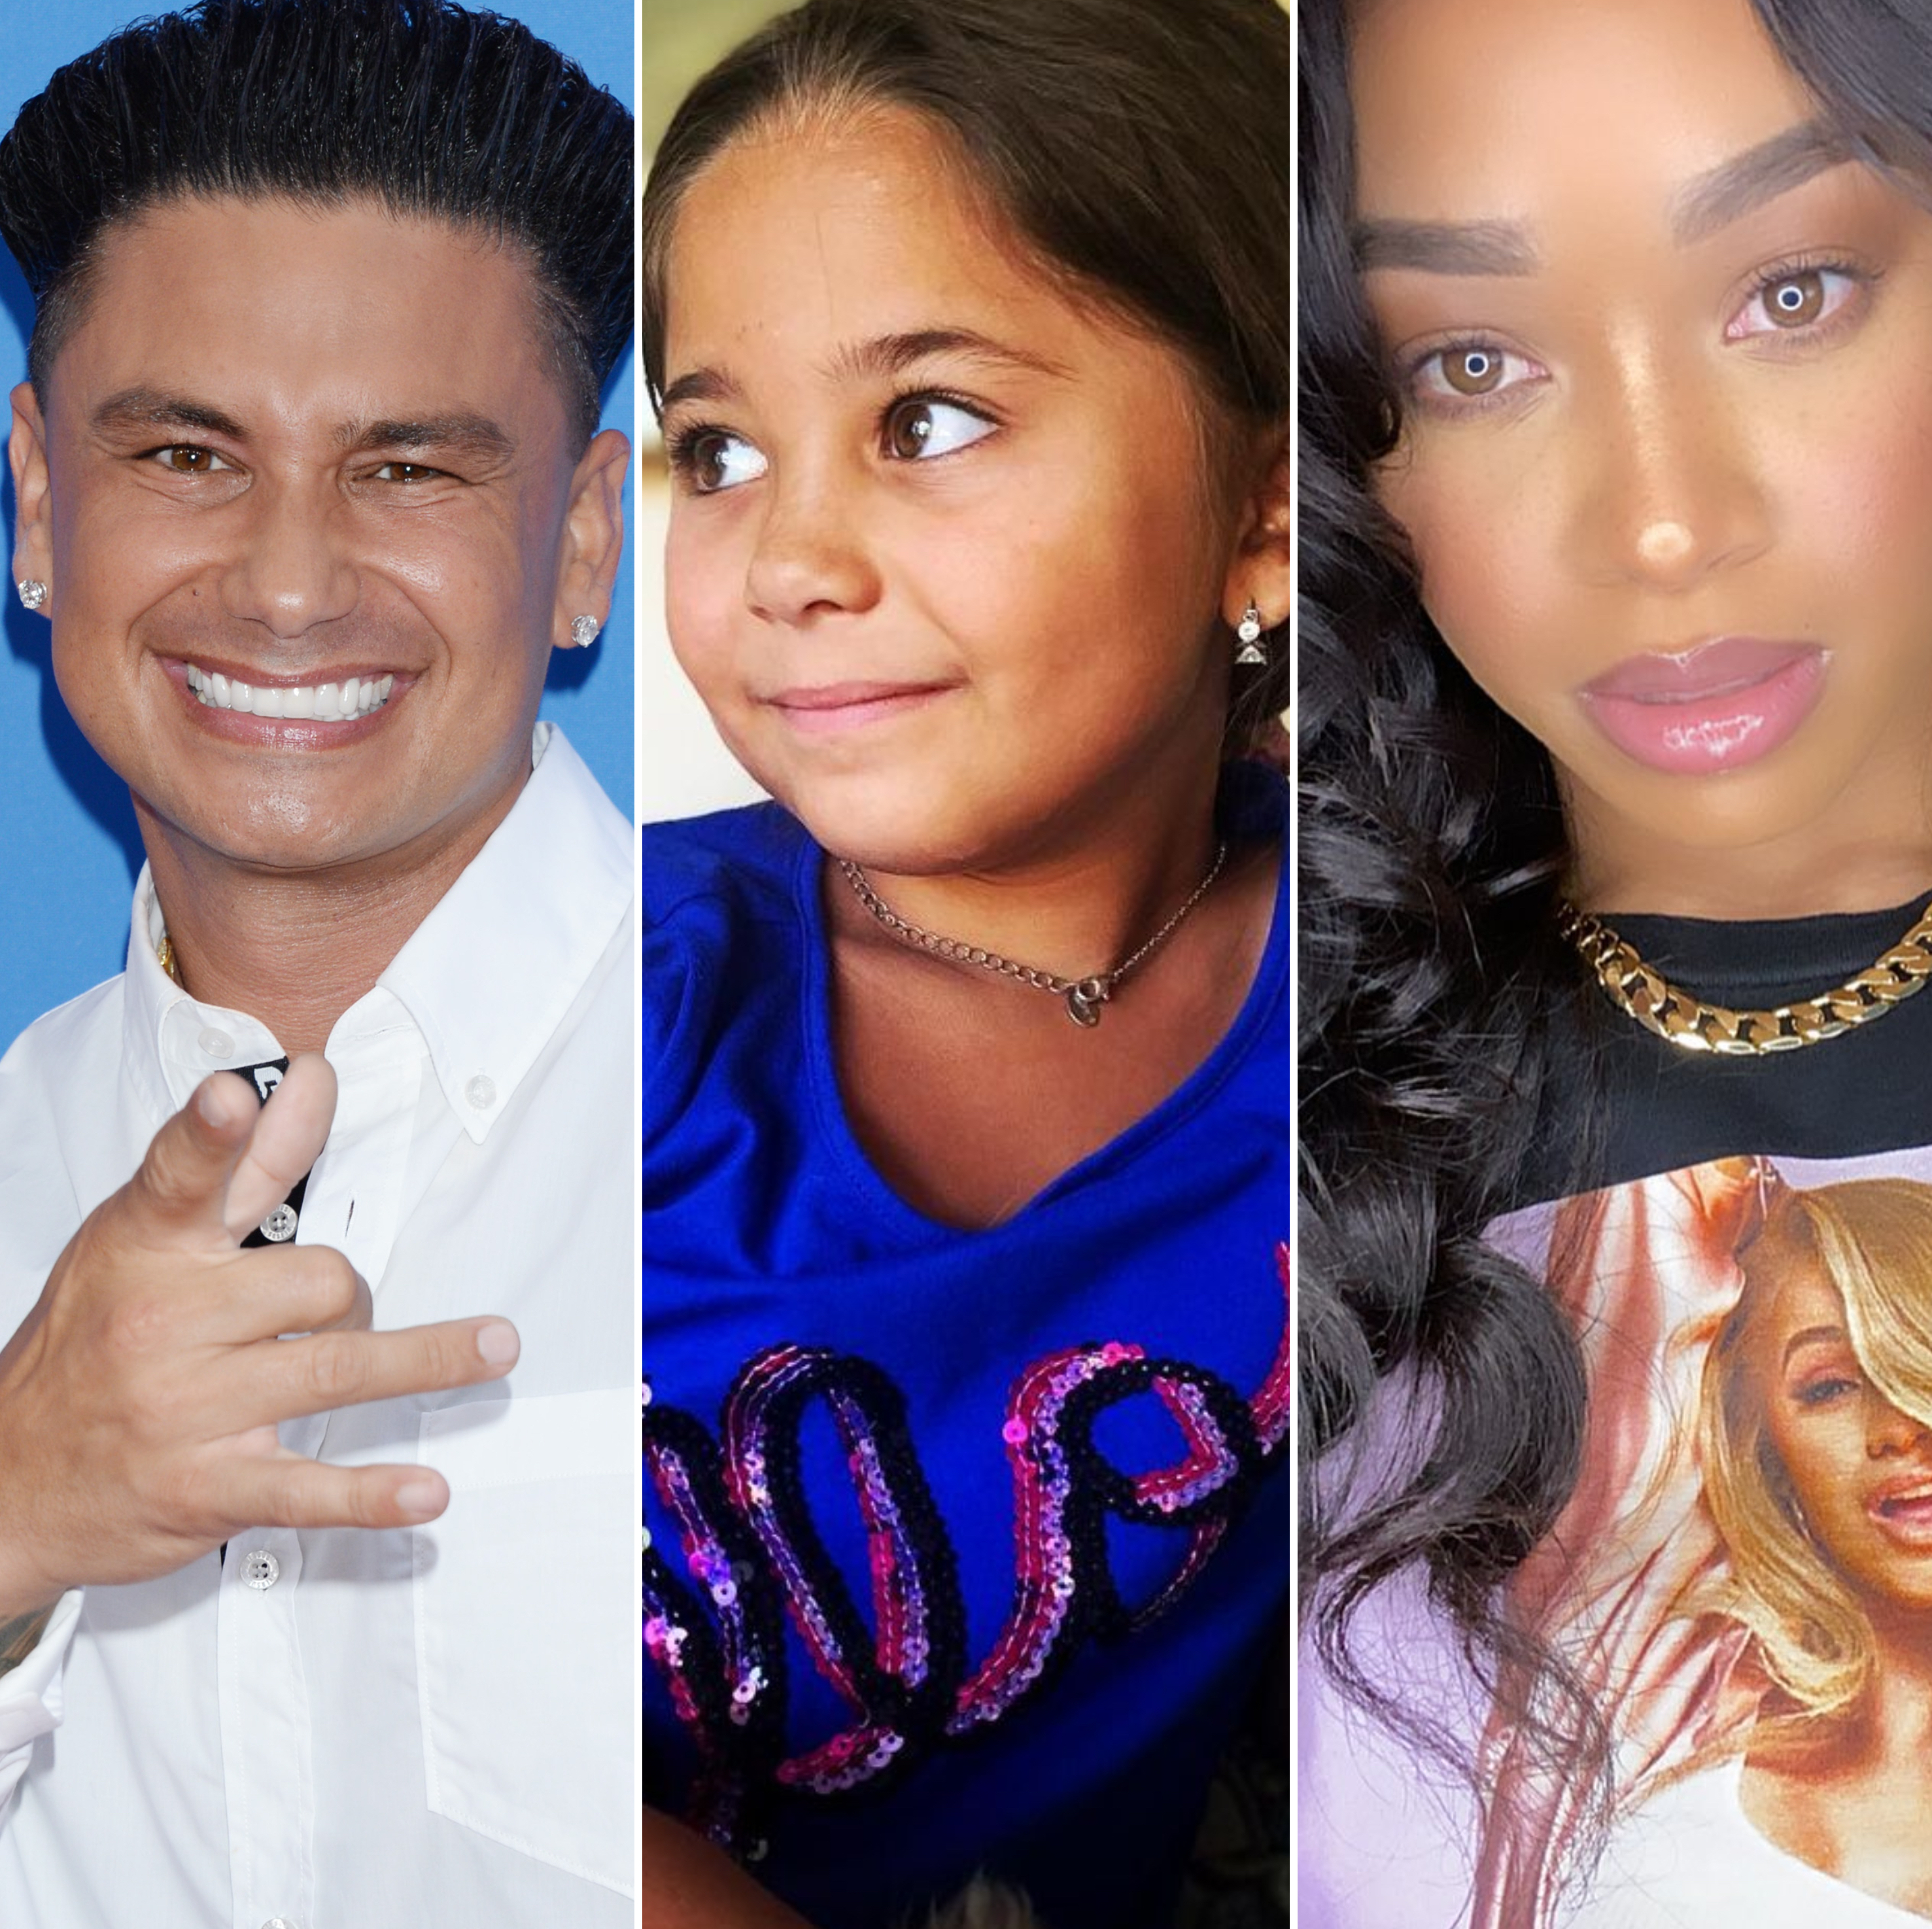 Has Nikki Hall Met Pauly D's Daughter Yet? Things Are Pretty Serious